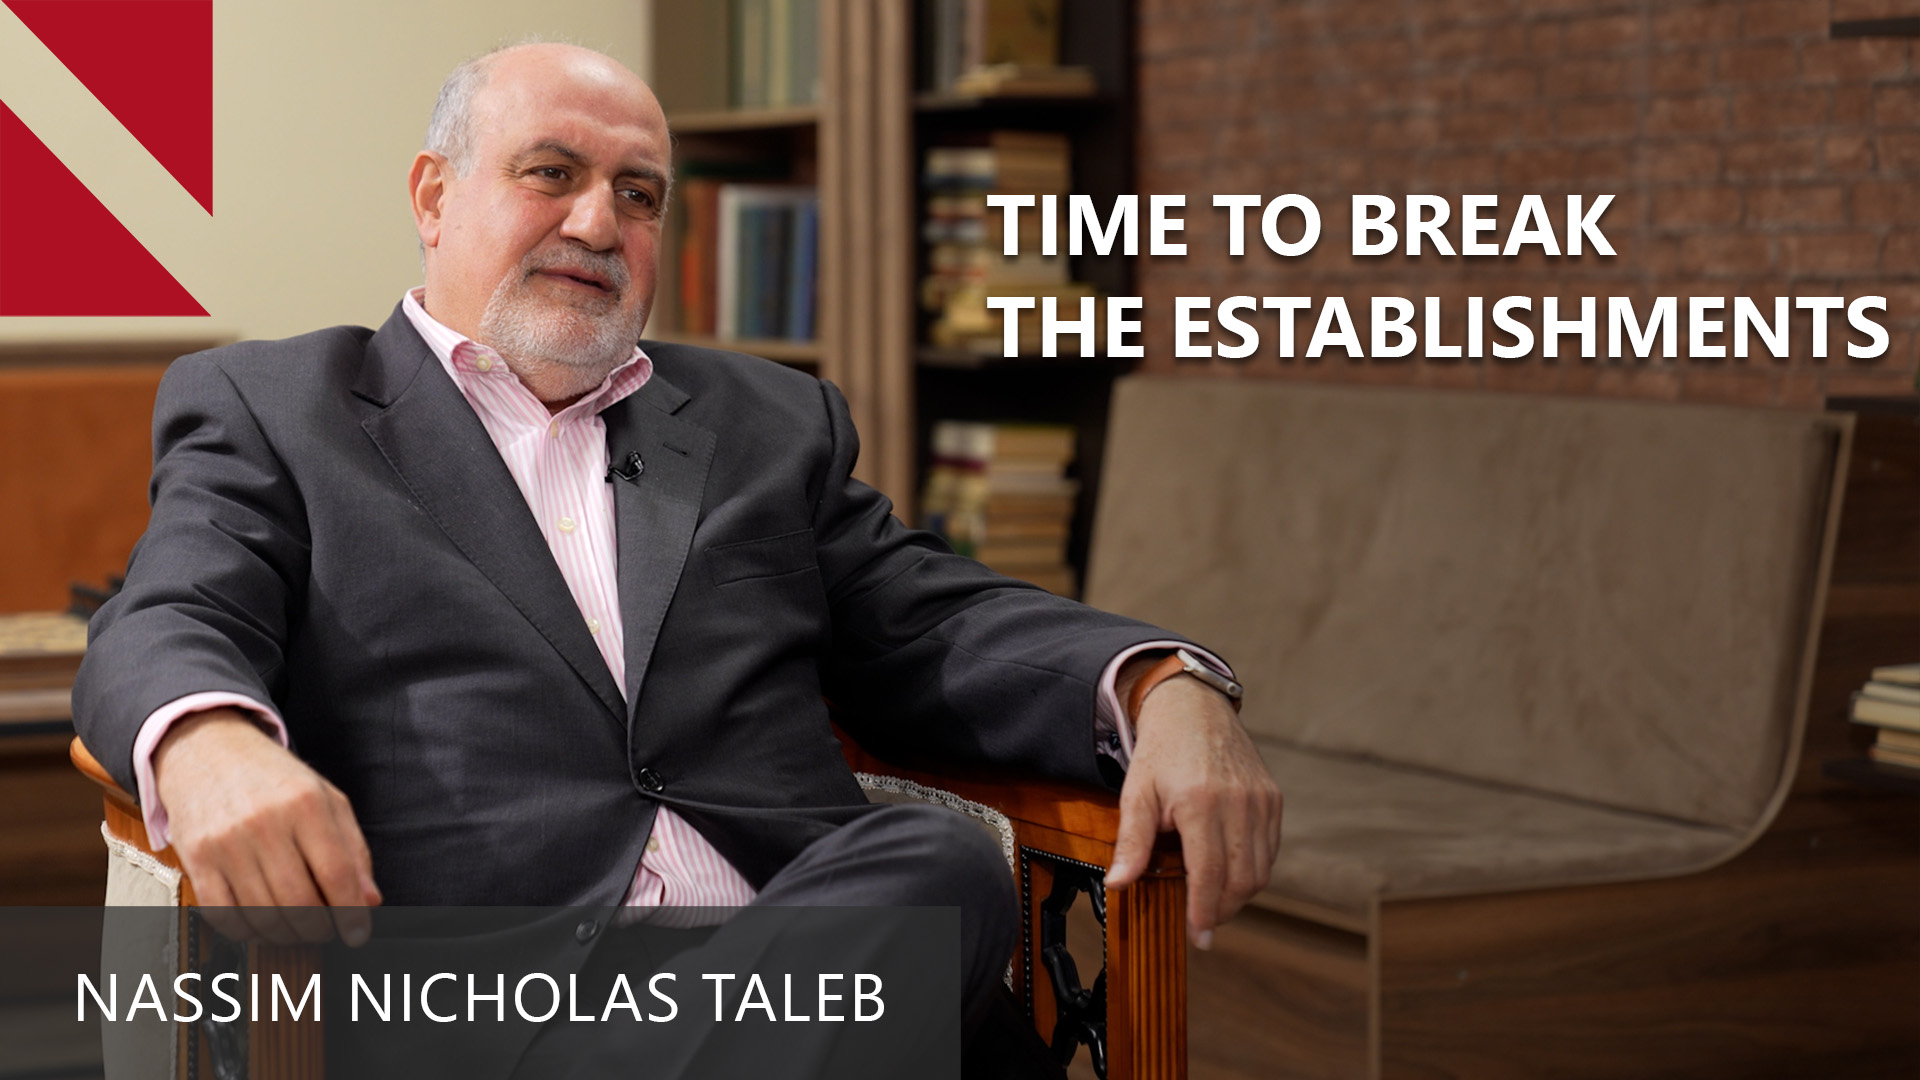 How the Social Fabric Works: A Conversation With Nassim Nicholas Taleb